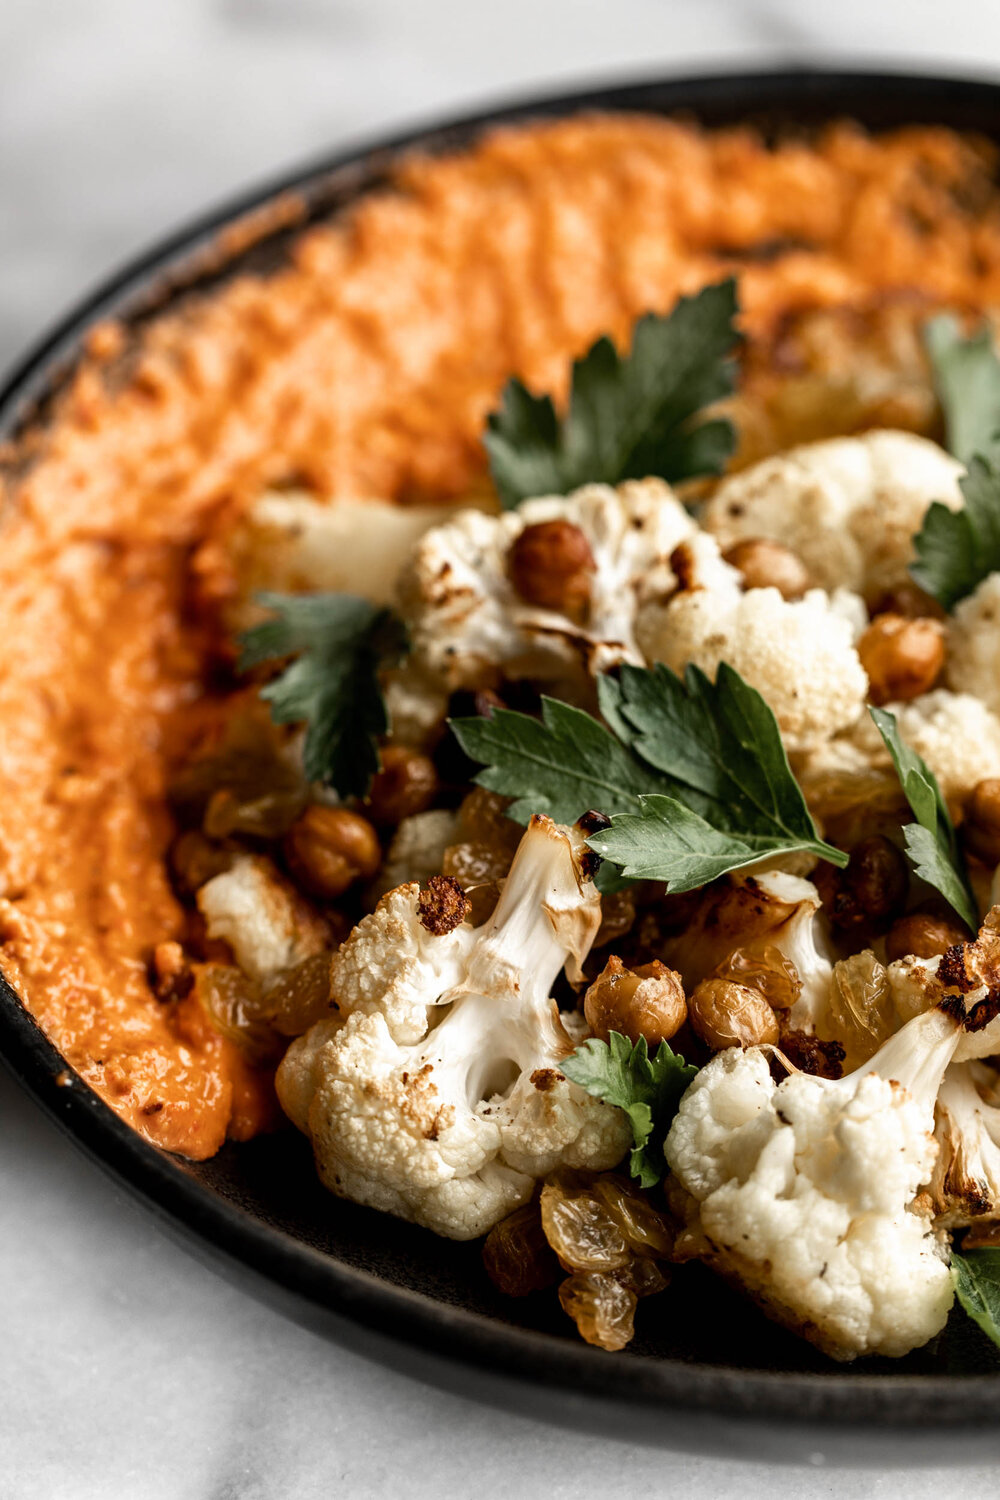 Charred Cauliflower with romesco and crispy chickpeas garnished with parsley